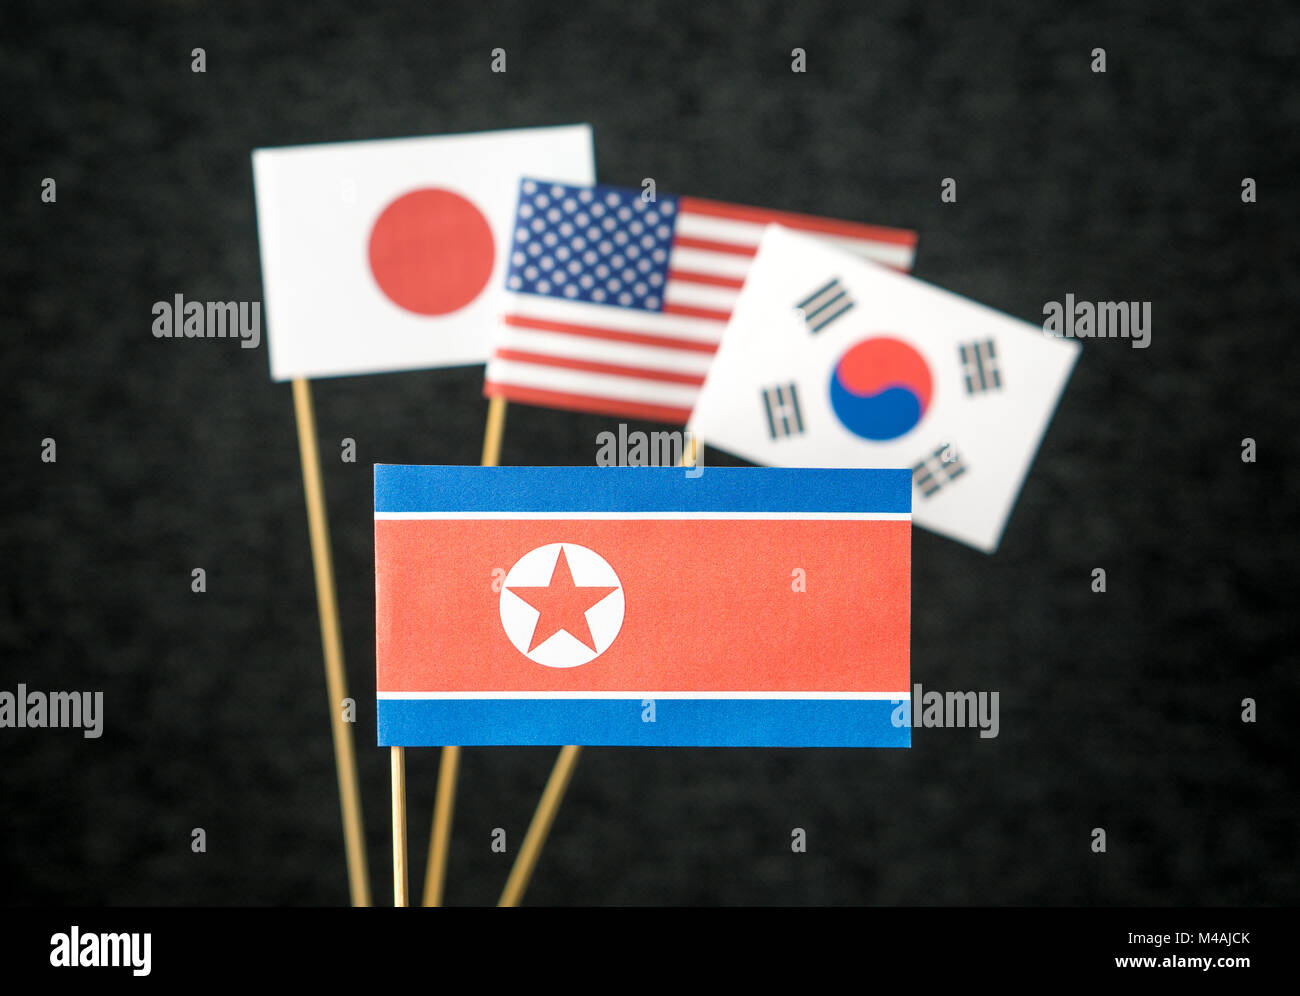 The flag of North Korea, United States of America (USA), South Korea and Japan made from paper on wooden stick against dark background. Stock Photo